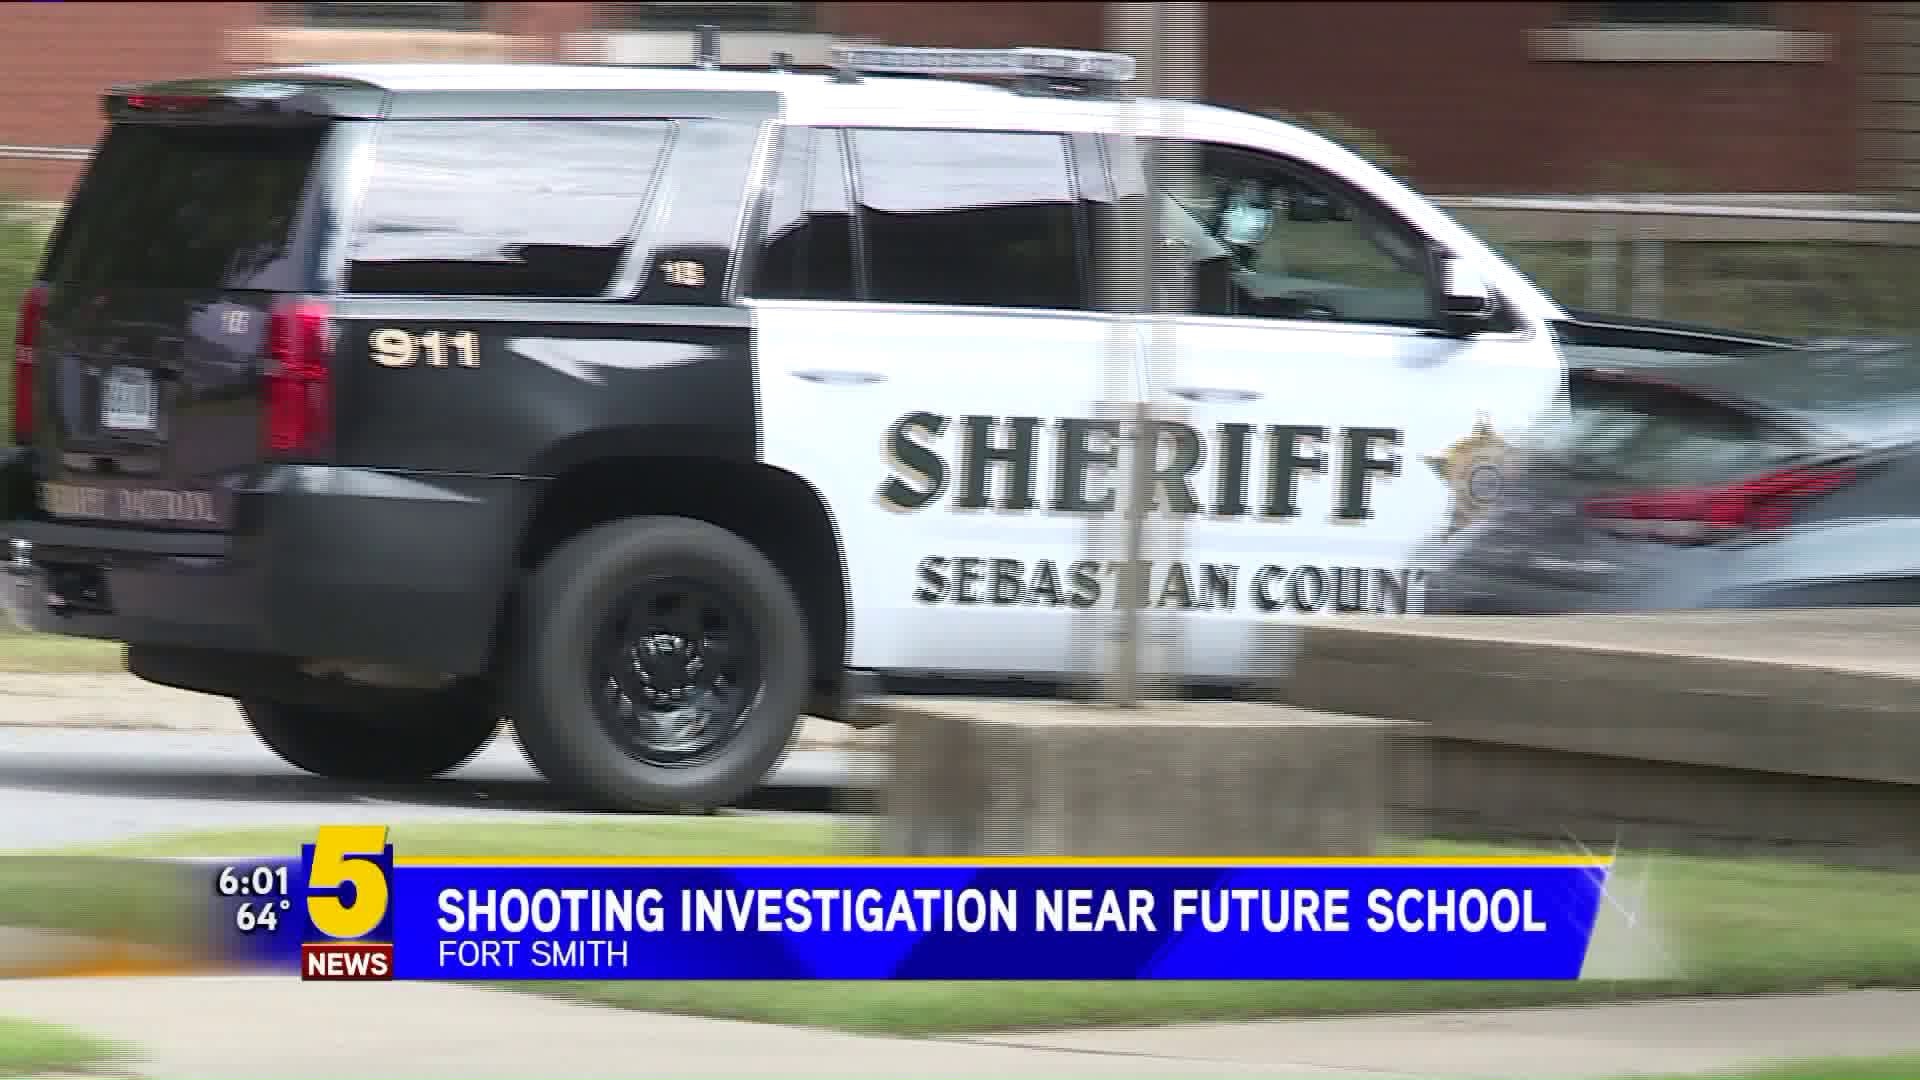 Shooting Investigation Near Future School of Fort Smith